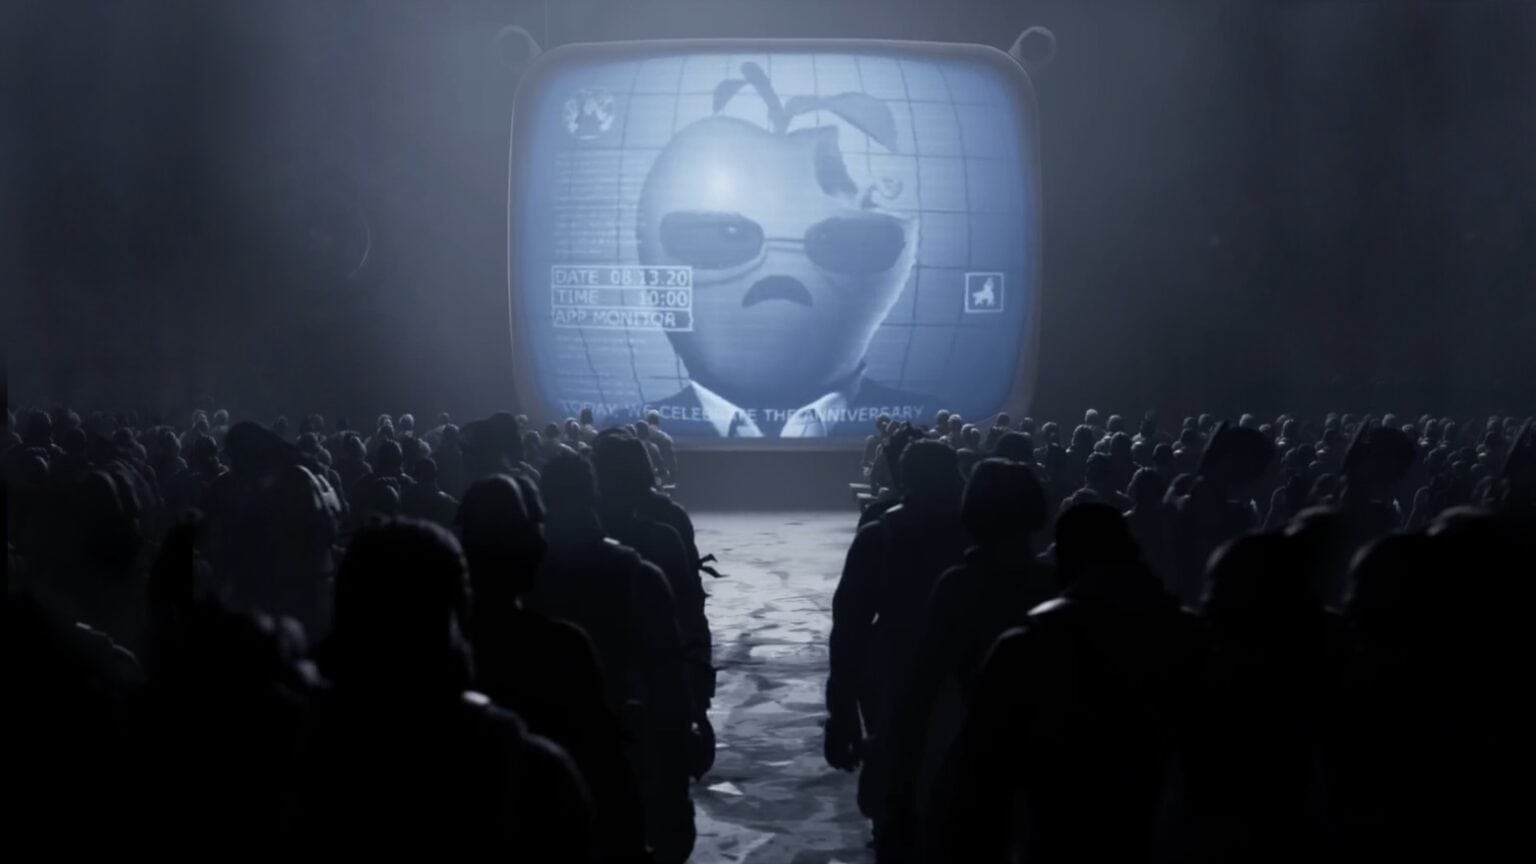 Epic Games mocked Apple with a ‘1984’ parody.